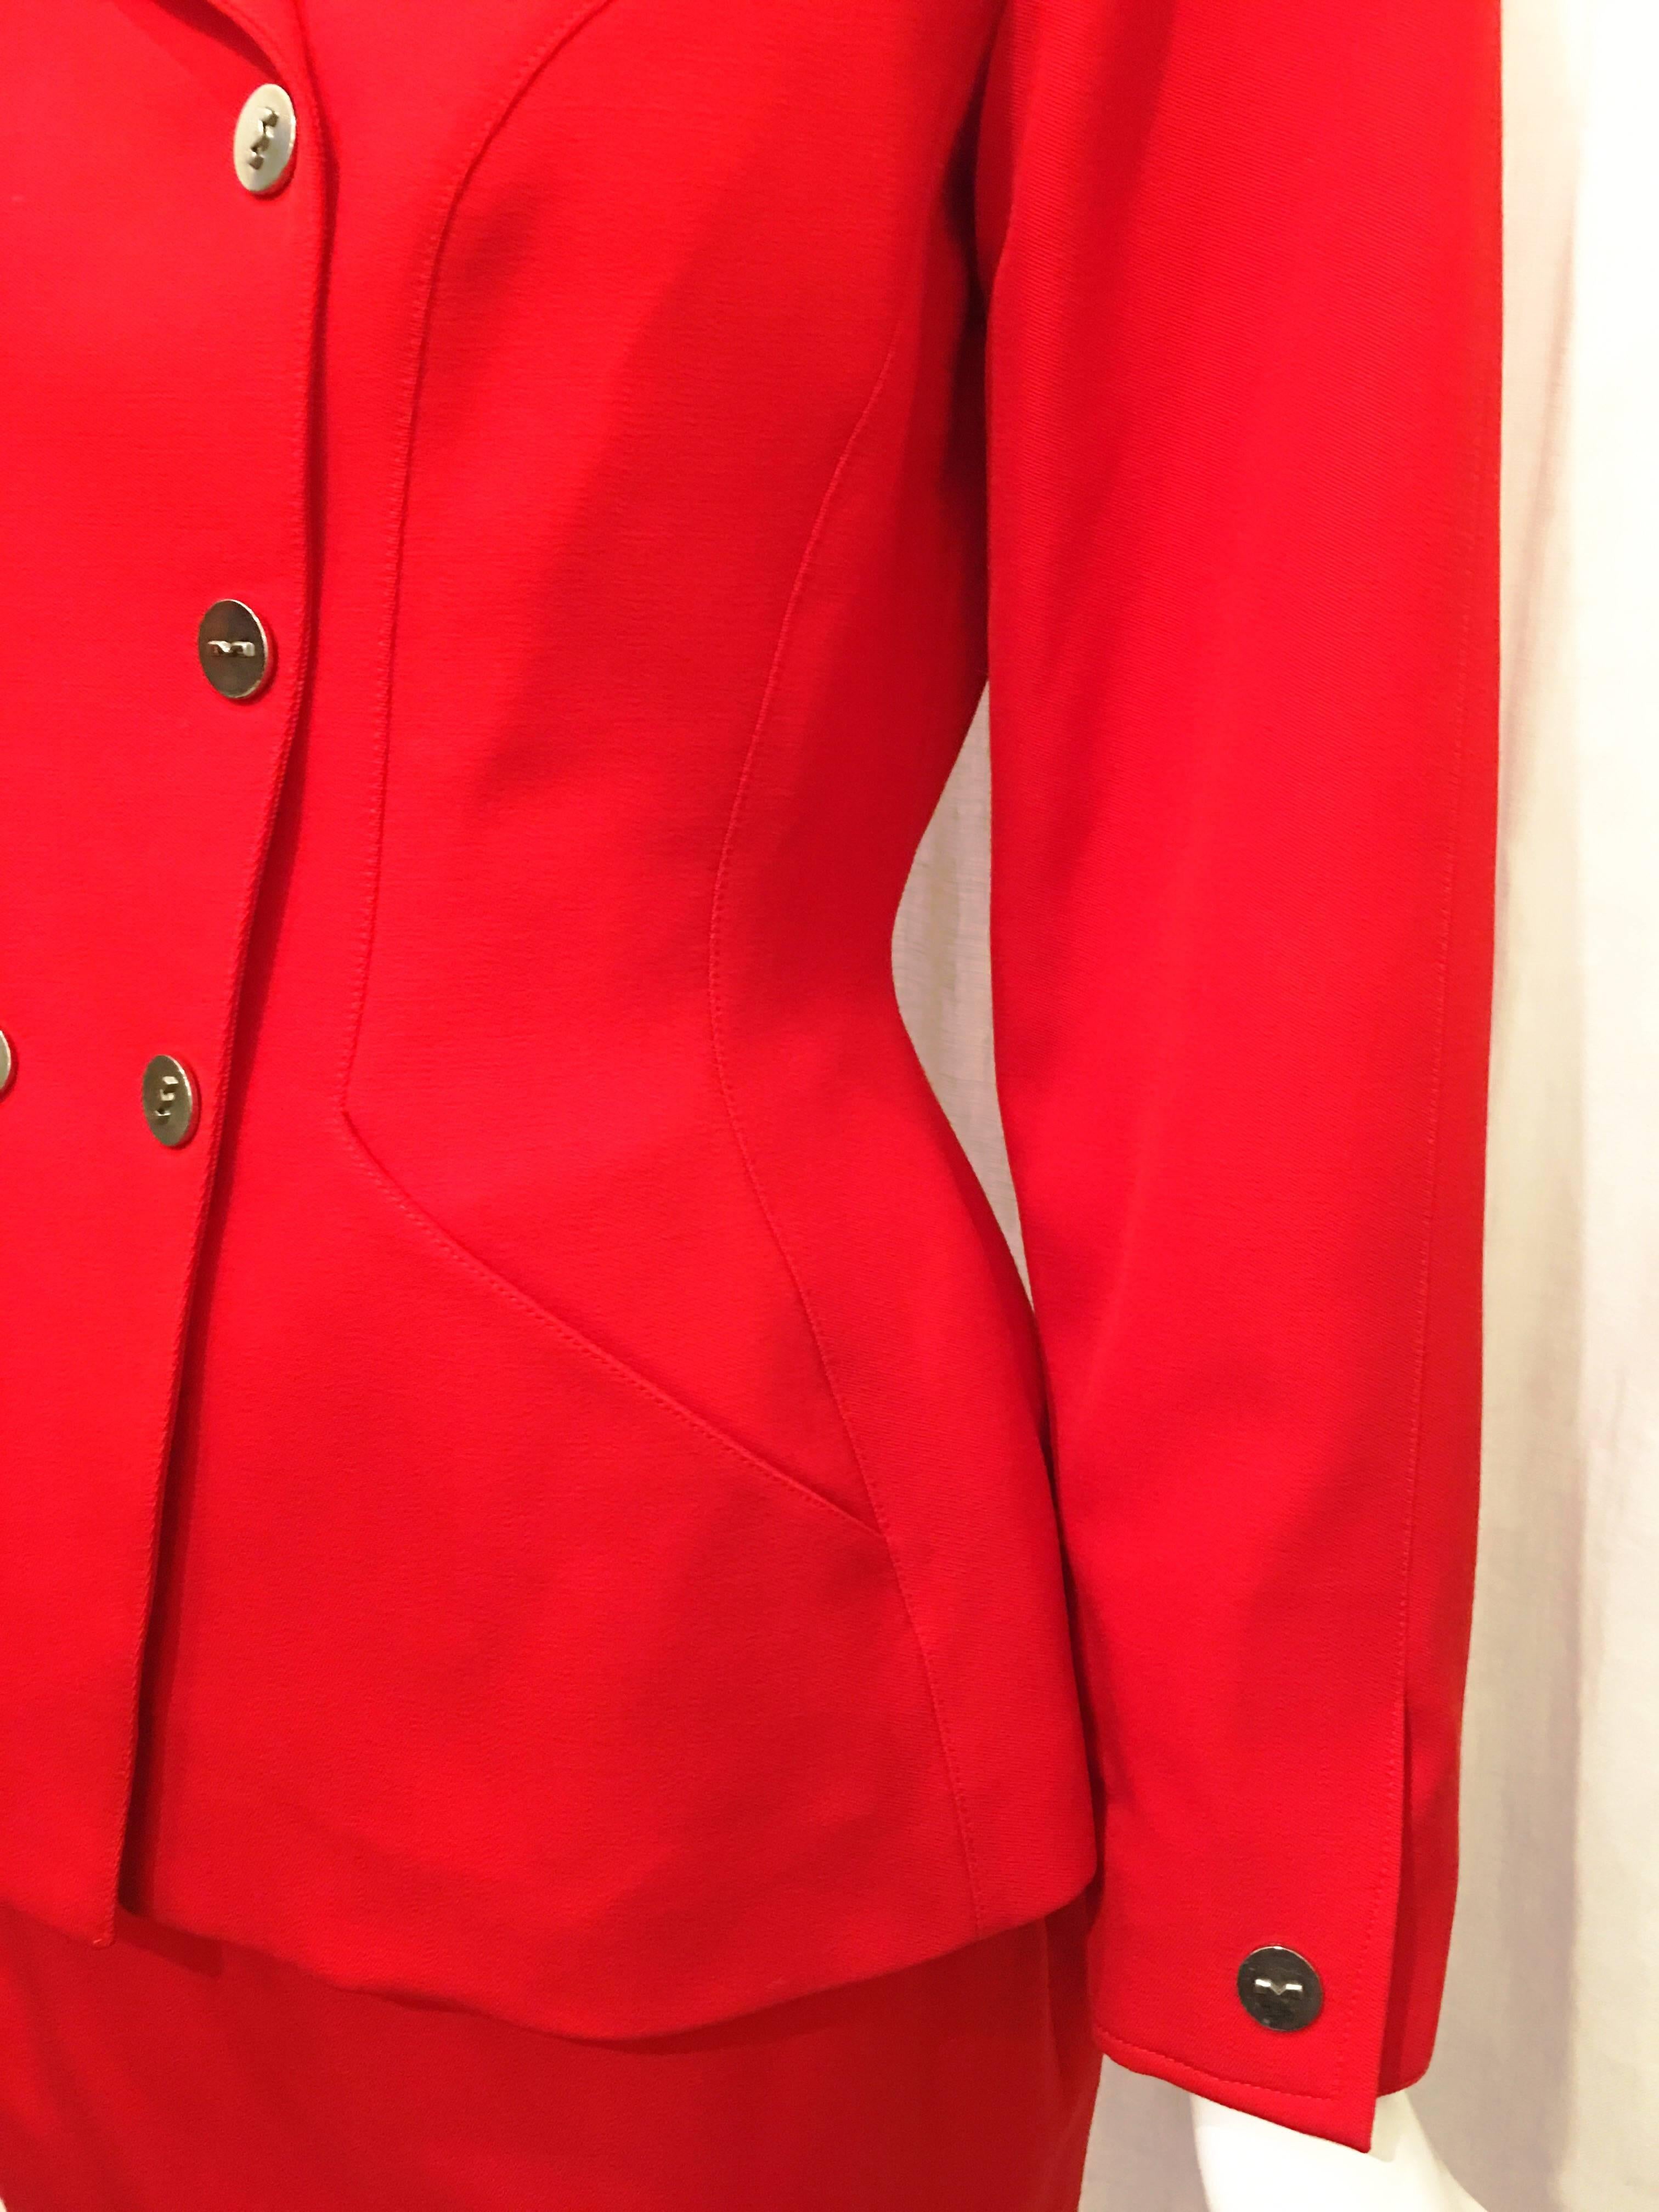 Thierry Mugler Red Double Breasted Wool Suit Jacket In Excellent Condition For Sale In Brooklyn, NY